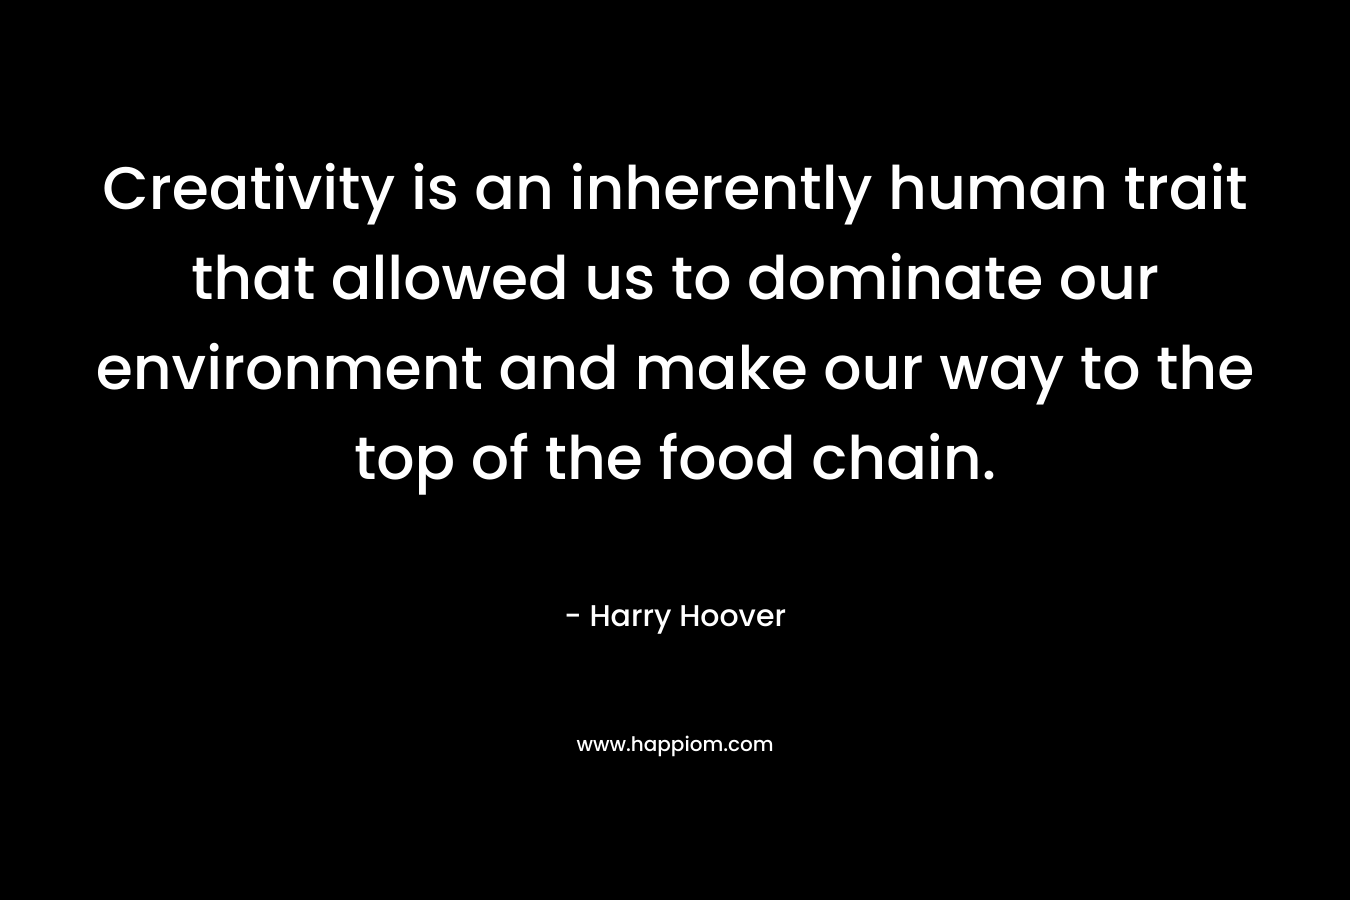 Creativity is an inherently human trait that allowed us to dominate our environment and make our way to the top of the food chain. – Harry Hoover